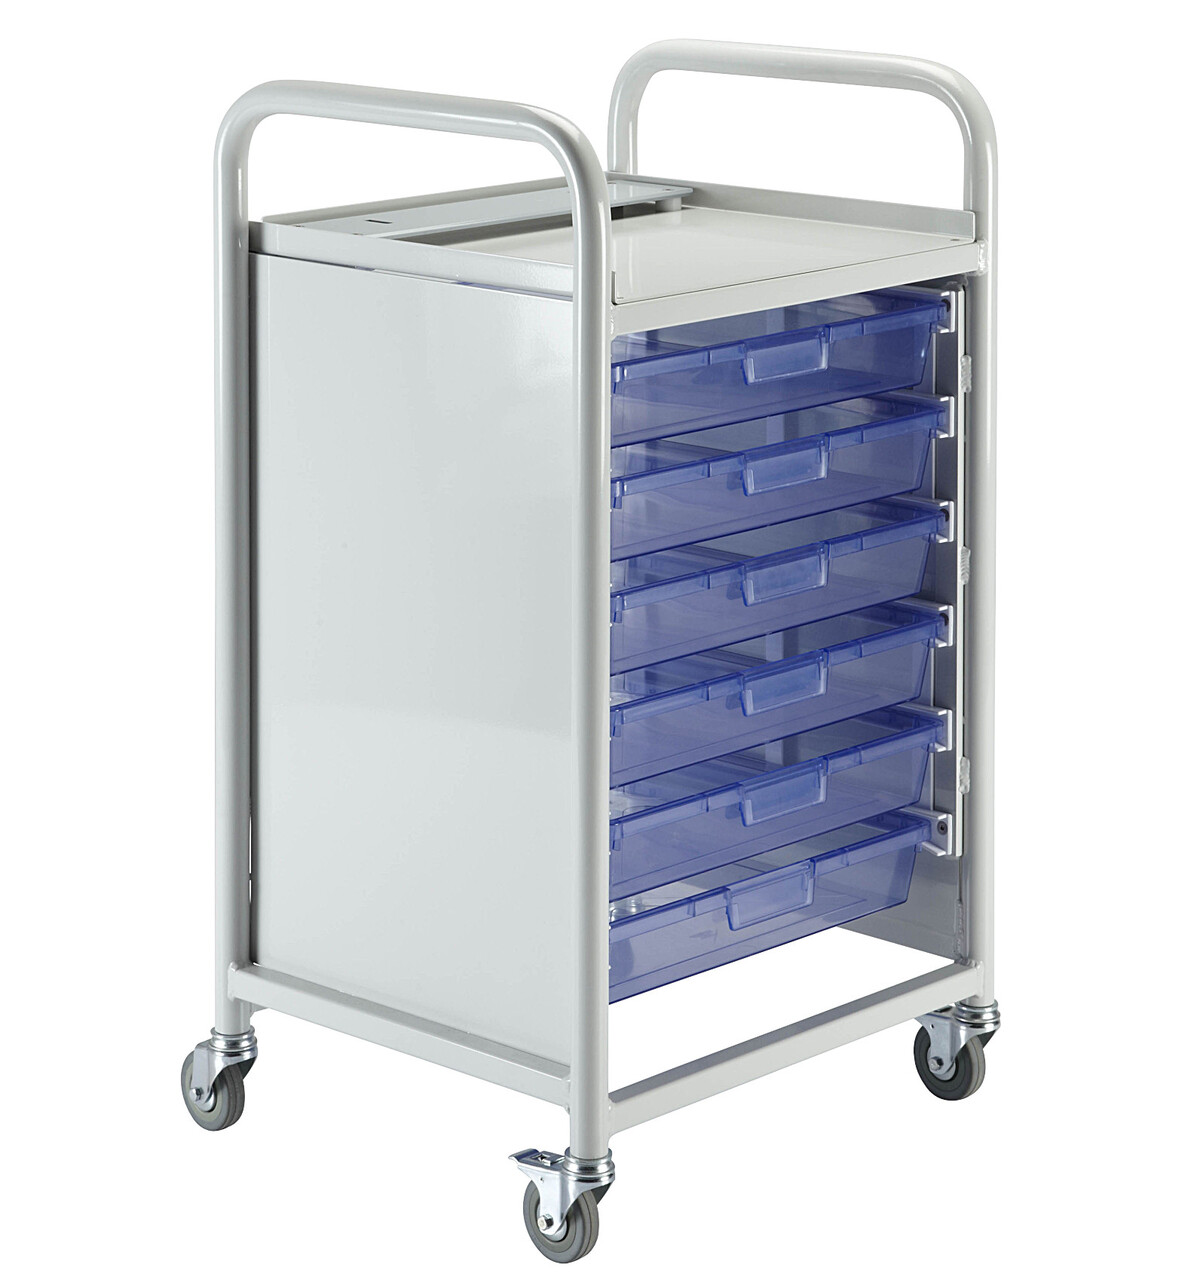 Picture 1 of Biopsy Trolley with 6 Drawers